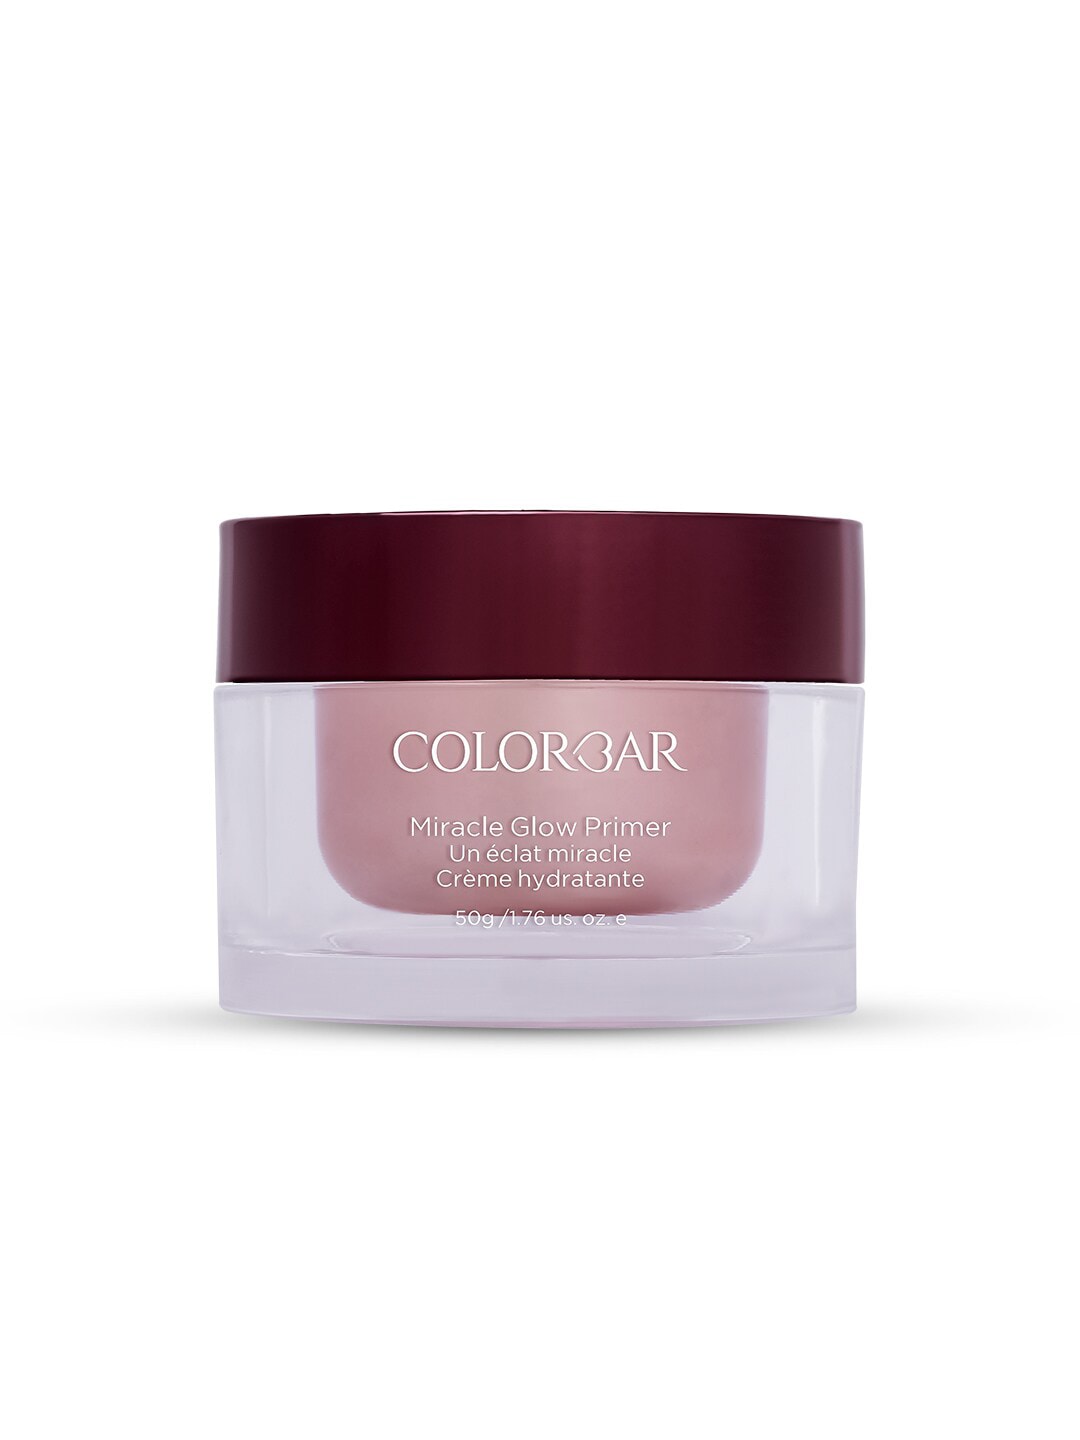 Colorbar Miracle Glow Primer with Camellia Oil & Hyaluronic Acid - 001 Price in India